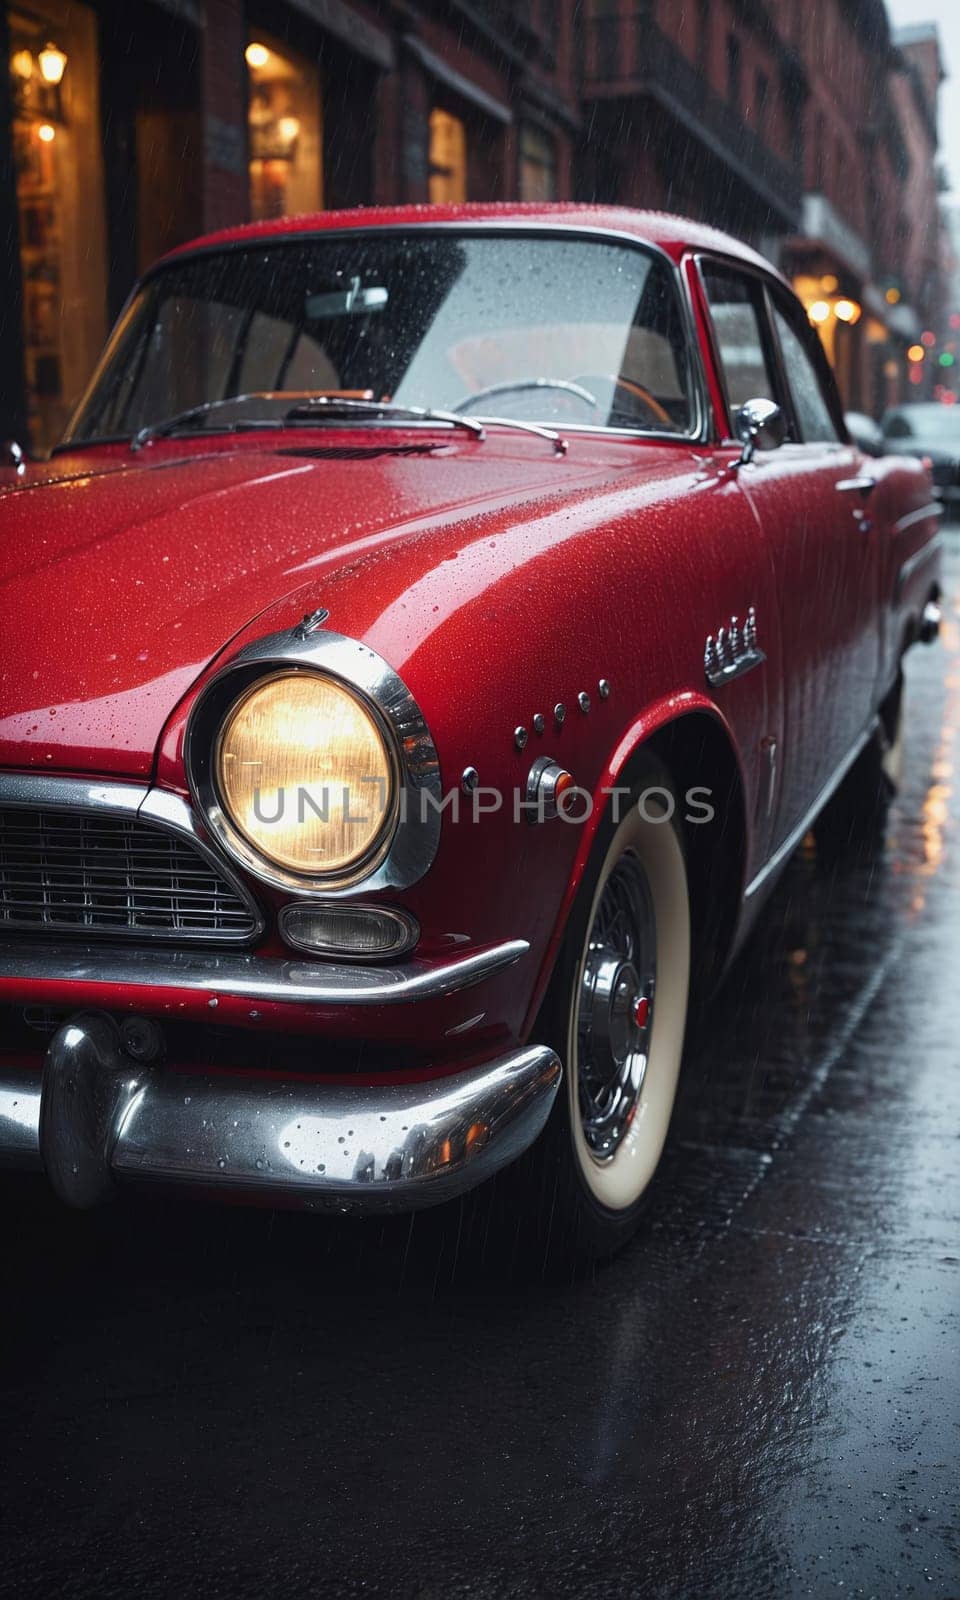 Vintage red car on a rainy street by Andre1ns